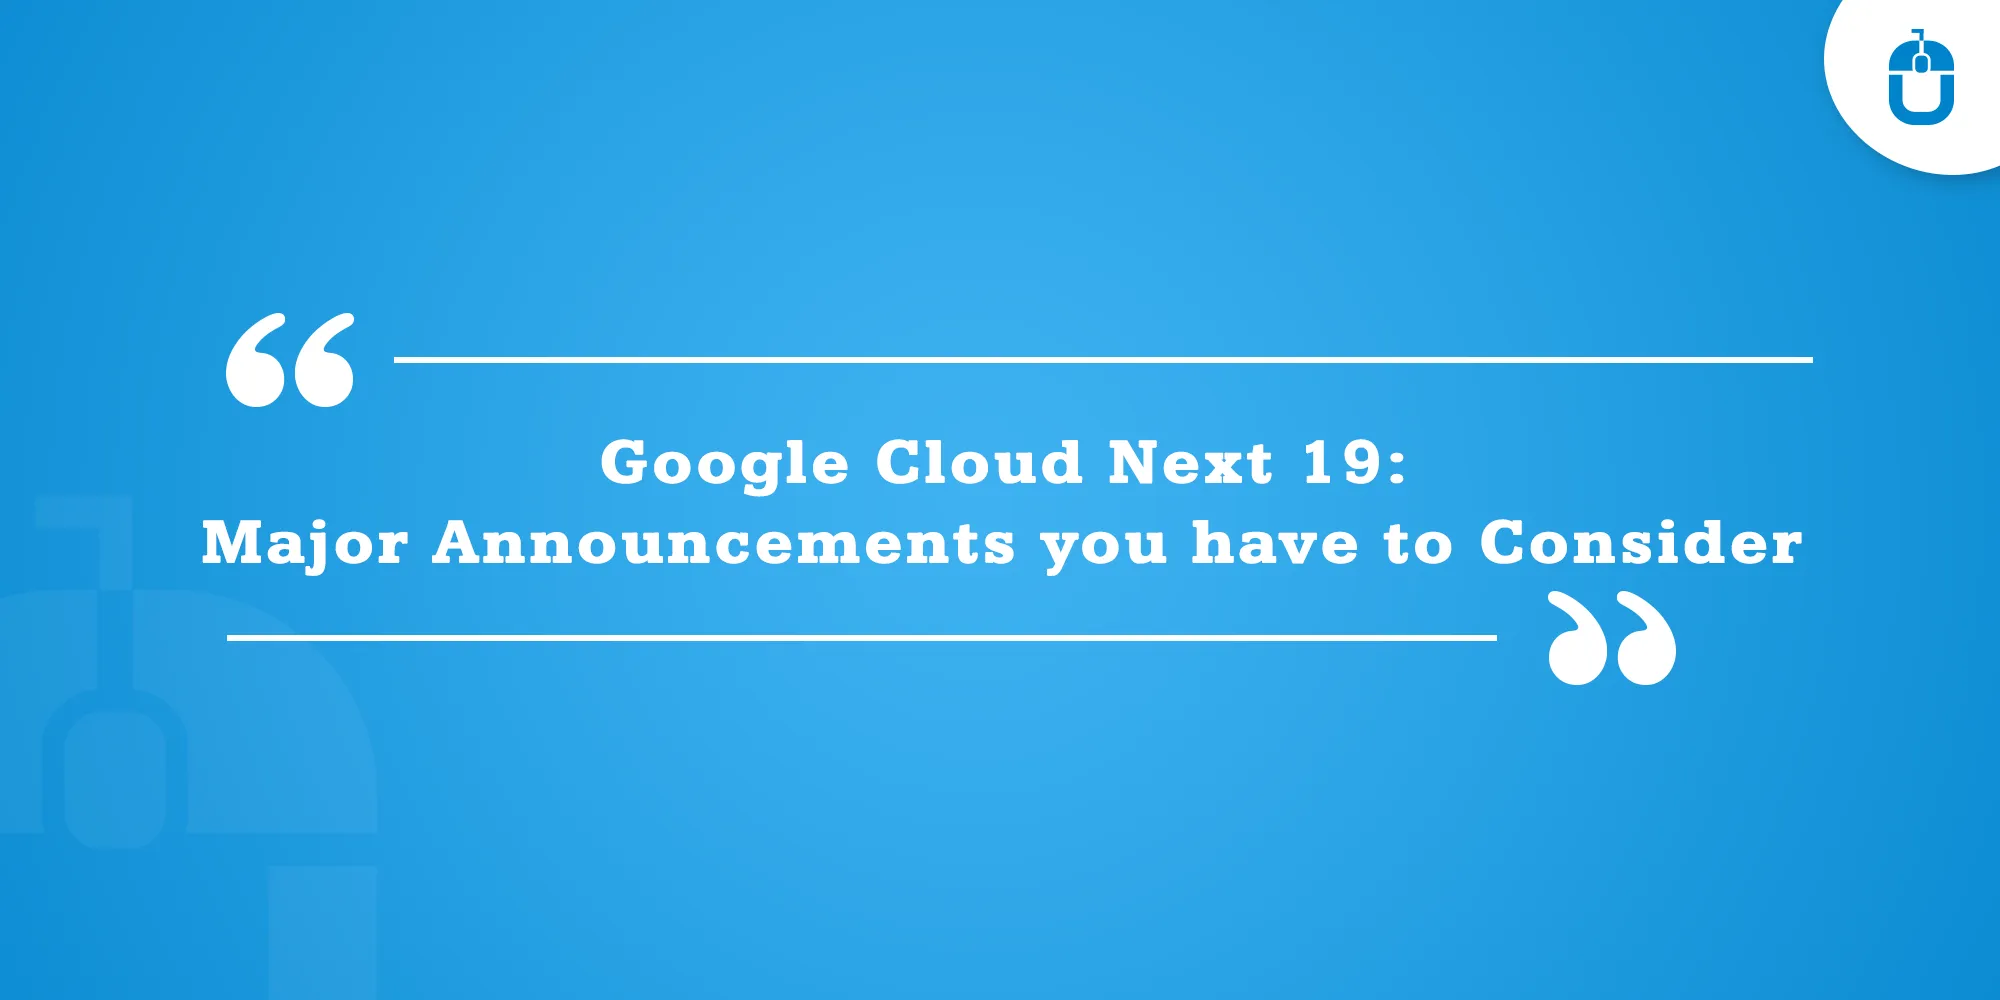 Google Cloud Next 19 Major Announcements You Have To Consider